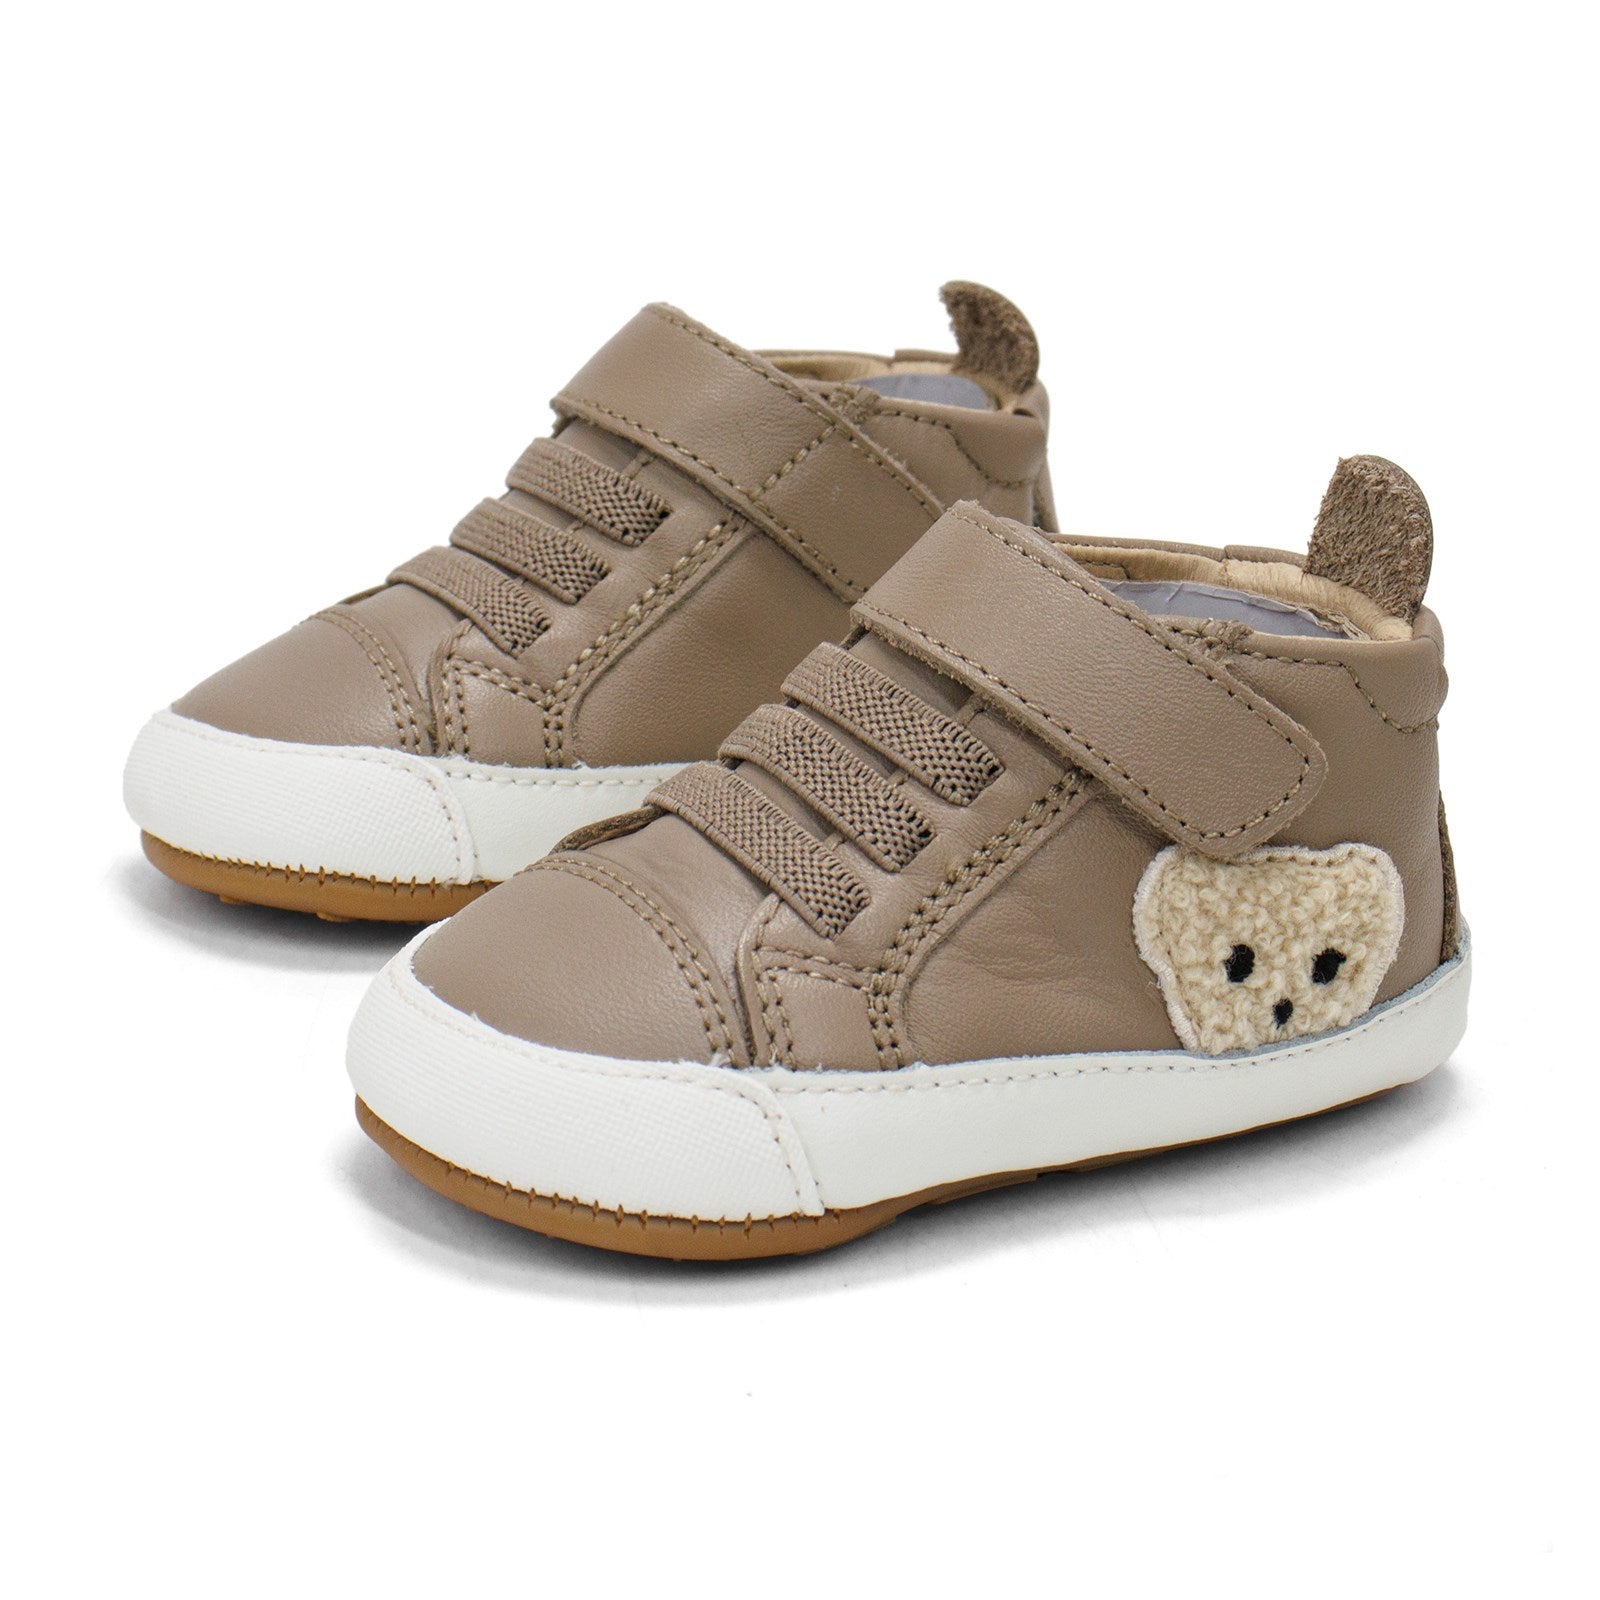 Old Soles Toddler Ted Baby Bear Embroidered High-Top Sneaker